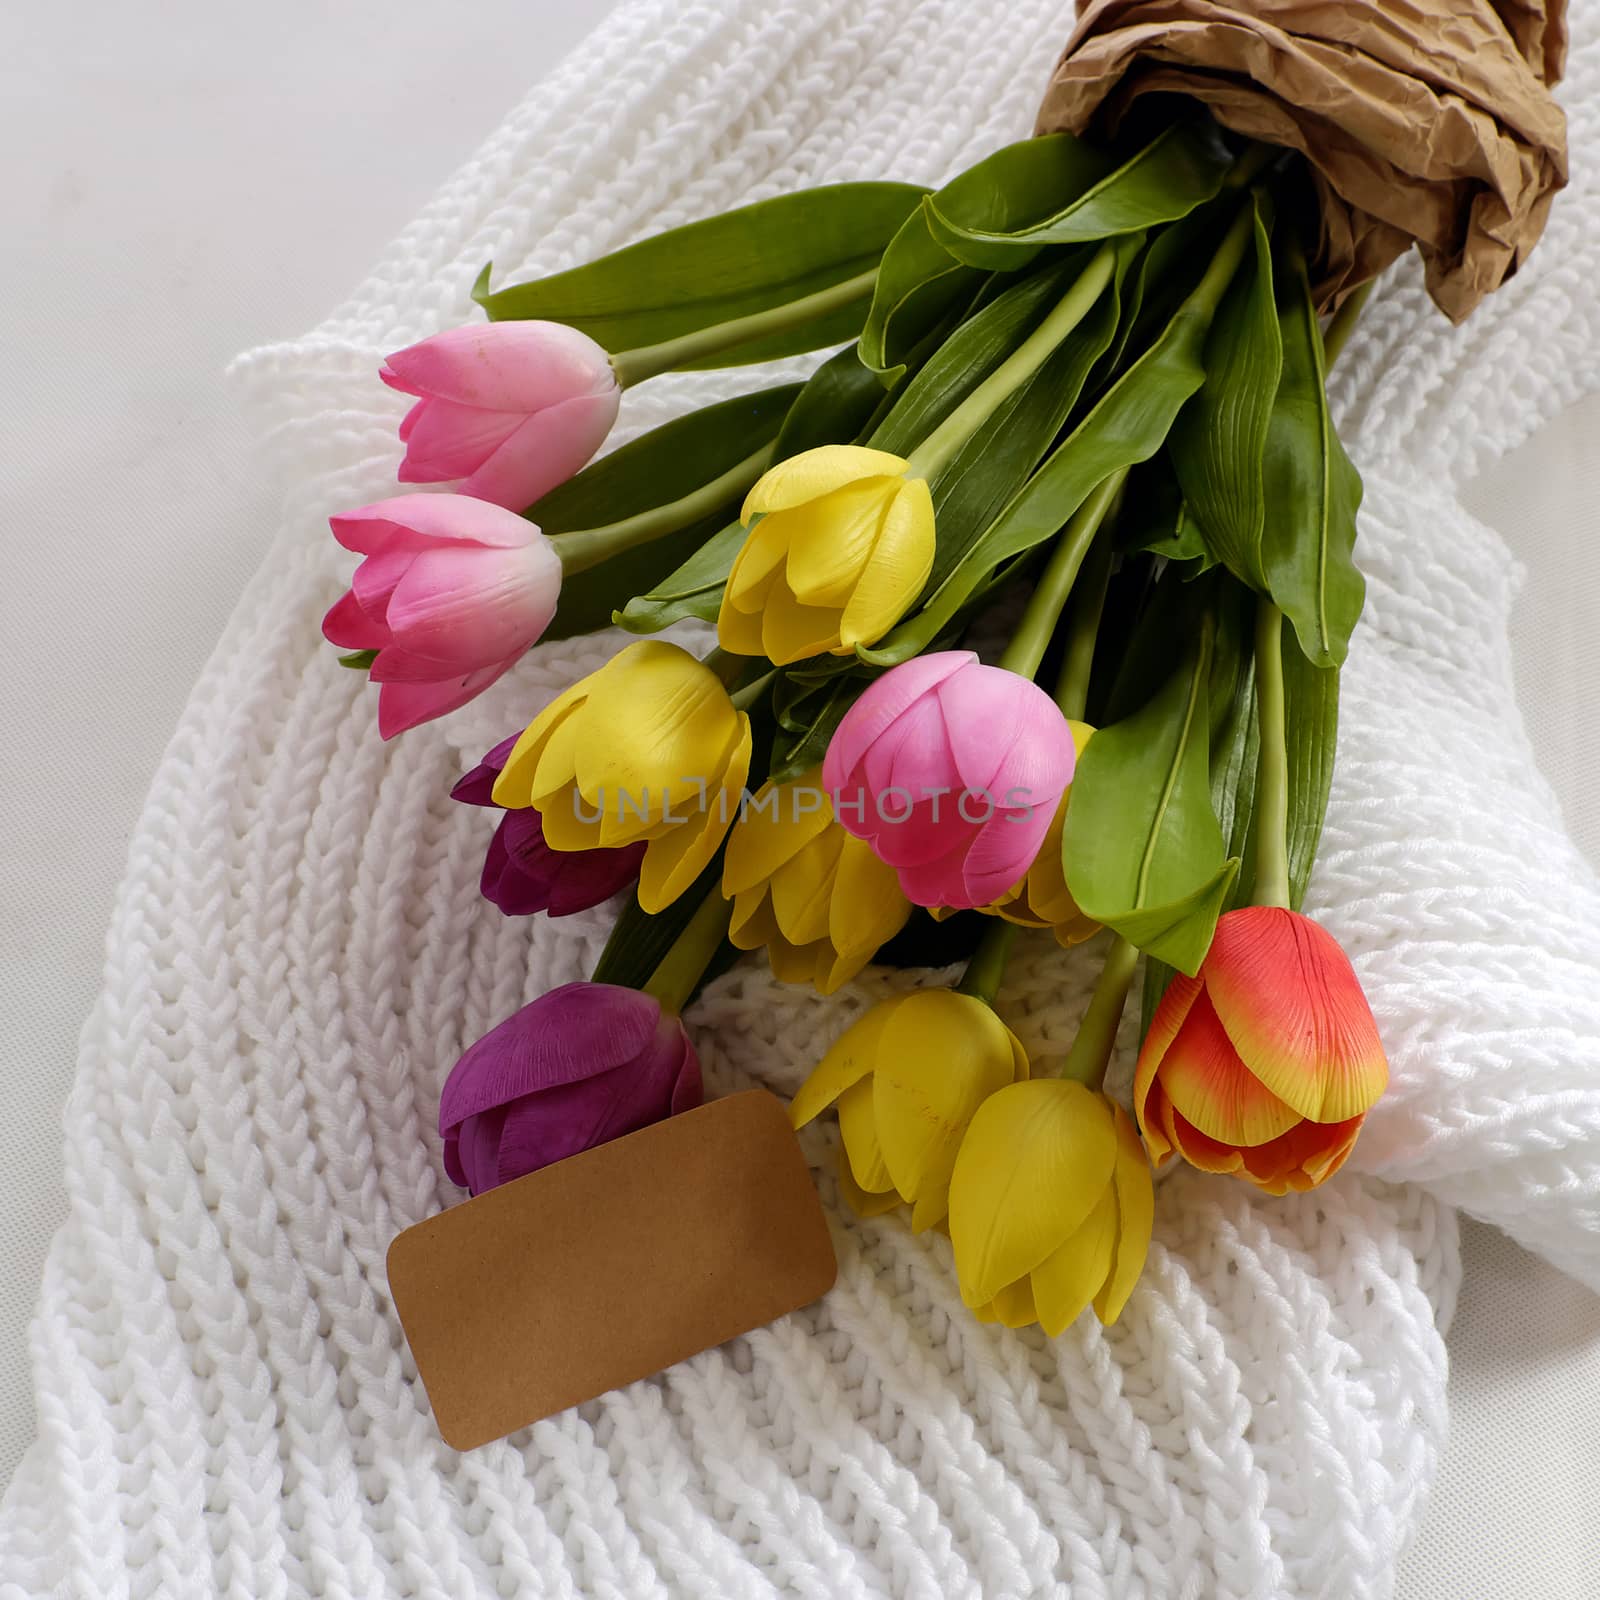 white scarf and tulip flower bouquet for mother day by xuanhuongho